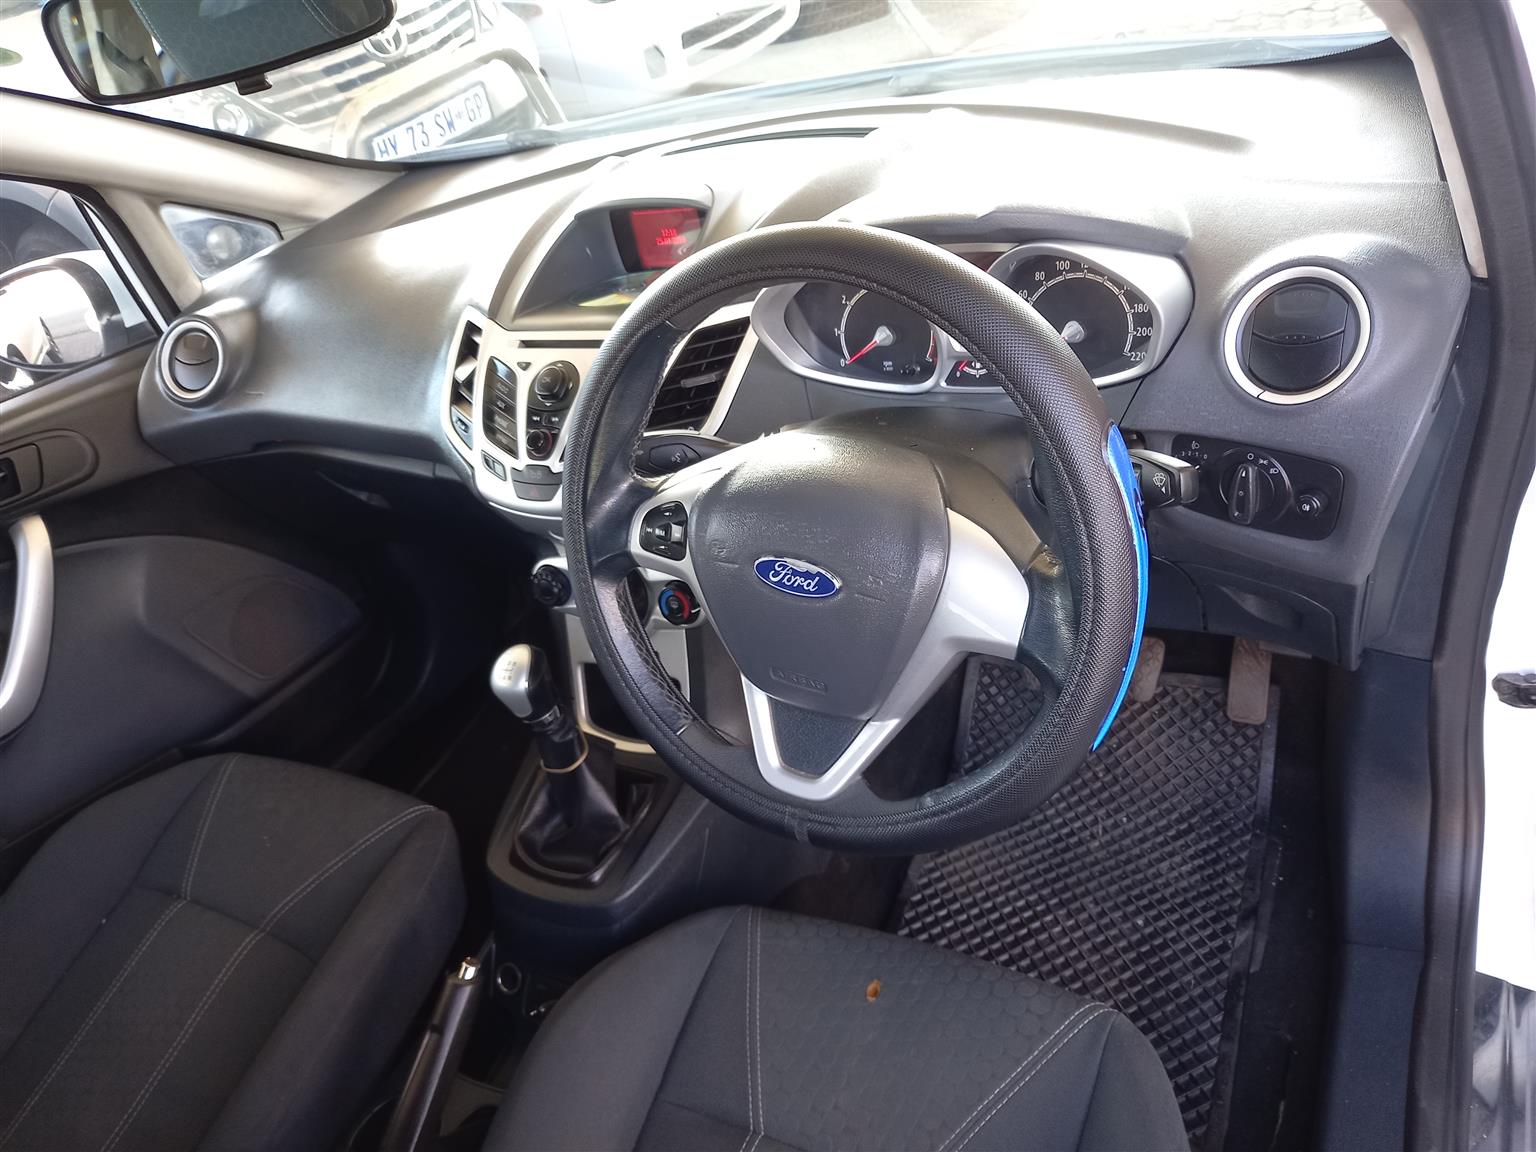 Ford Fiesta Copue